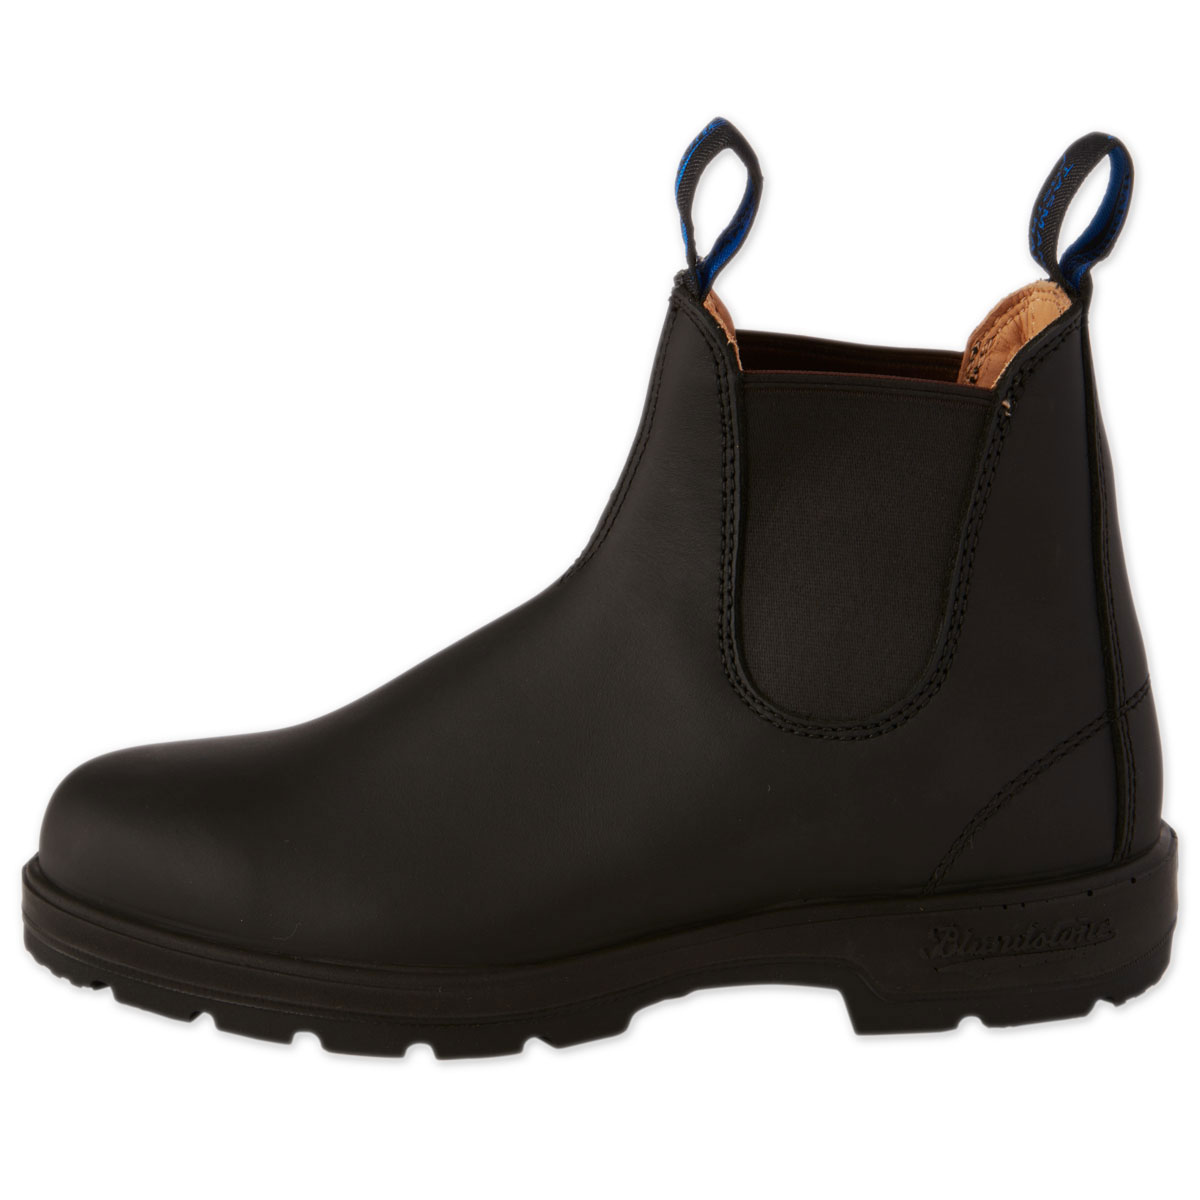 blundstone boots thermal